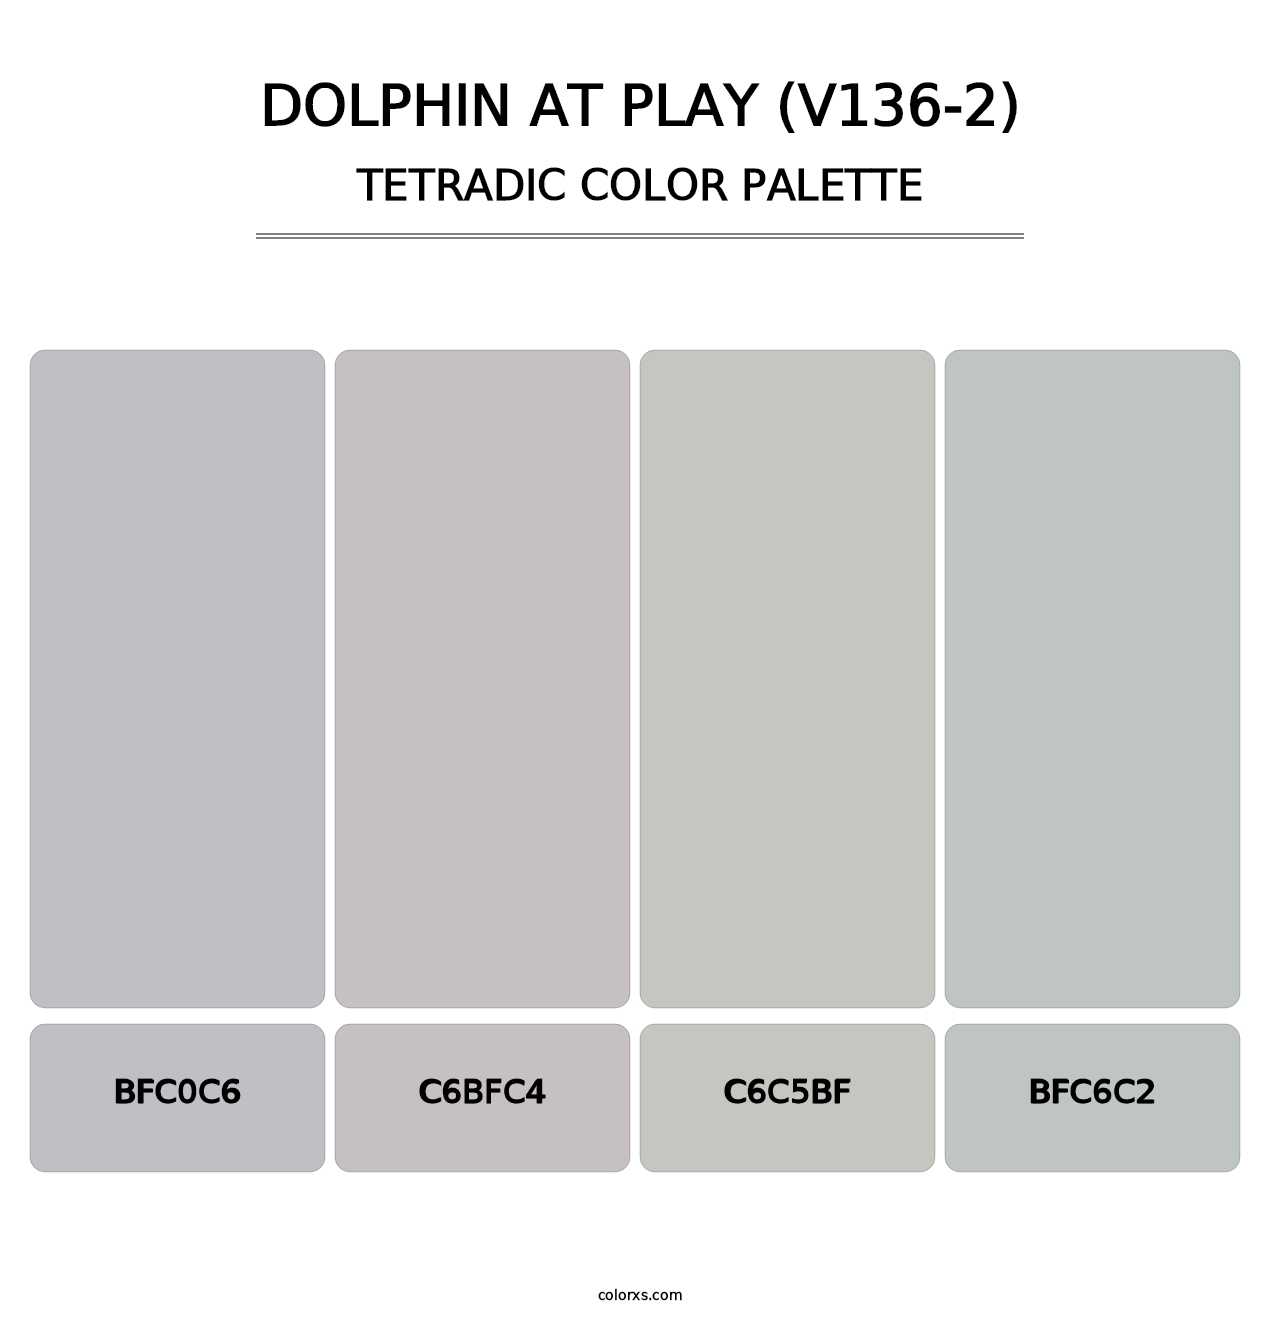 Dolphin at Play (V136-2) - Tetradic Color Palette